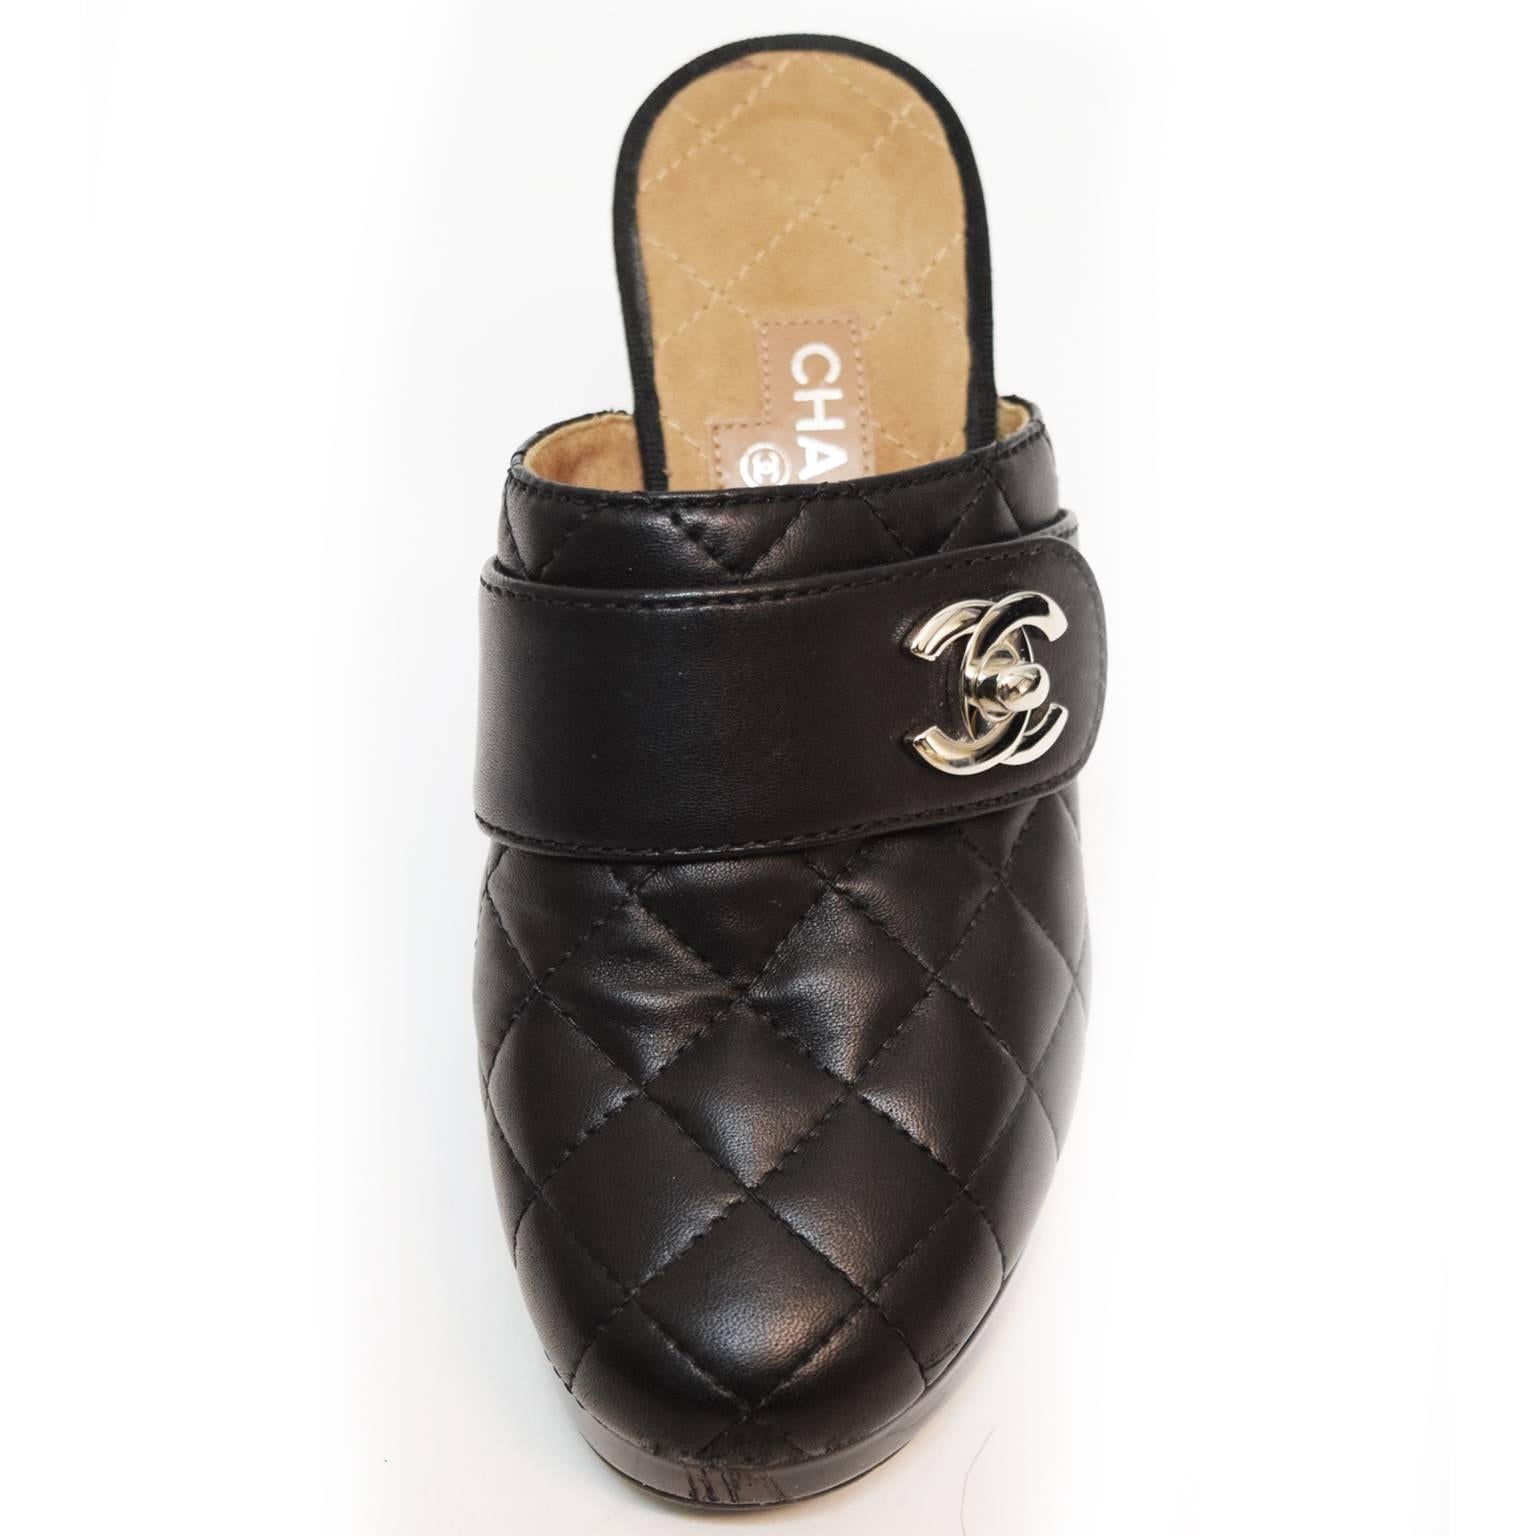 These classic Chanel Clog are made with soft lambskin leather in a quilted stitched pattern in consistency with Chanel's statement quilted handbags. Strap detail on the toe box of the shoe with the Chanel logo turn lock in silver. Wooden heel